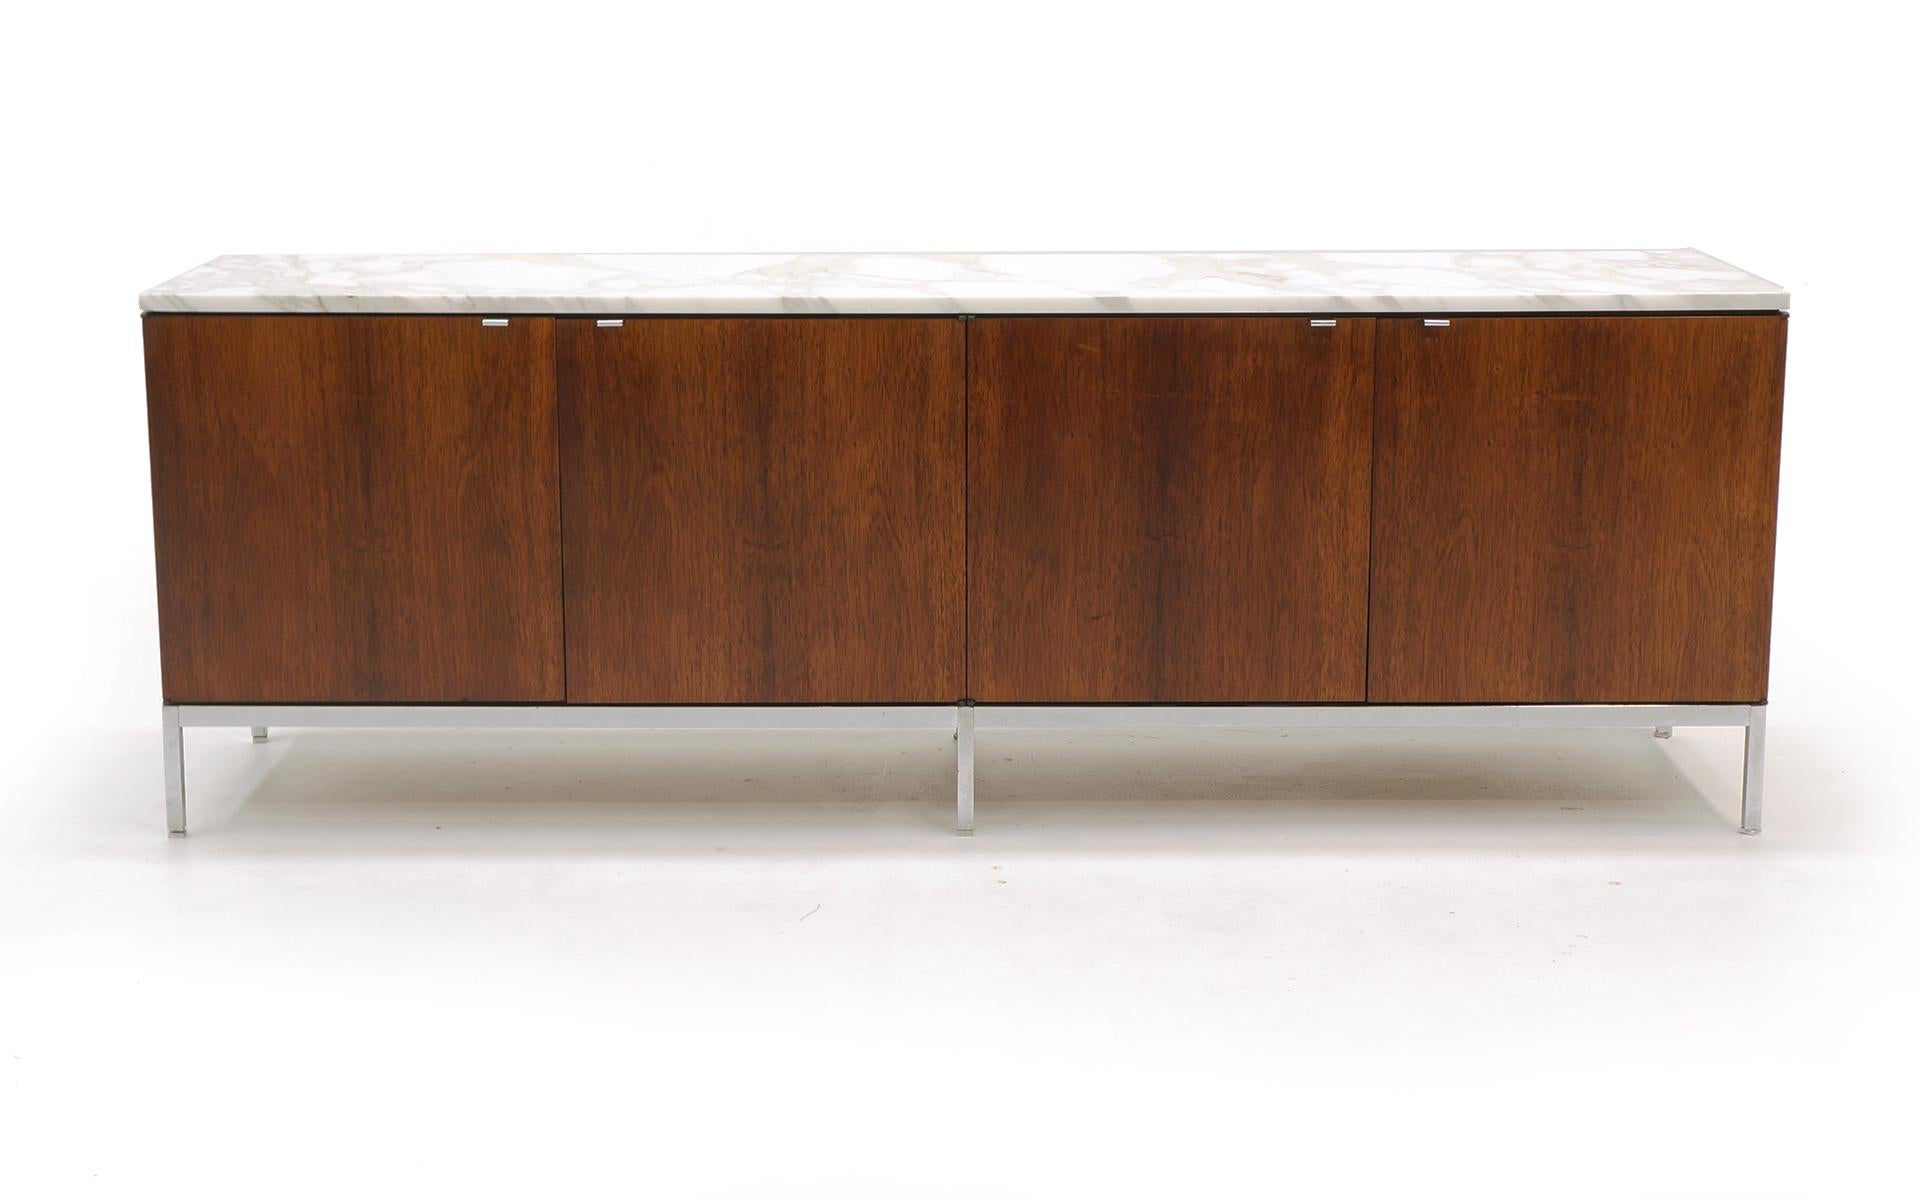 Beautiful matched grain Brazilian rosewood Florence Knoll credenza with white and gray marble top. This is an exceptional example of this design. Very good to excellent original condition.